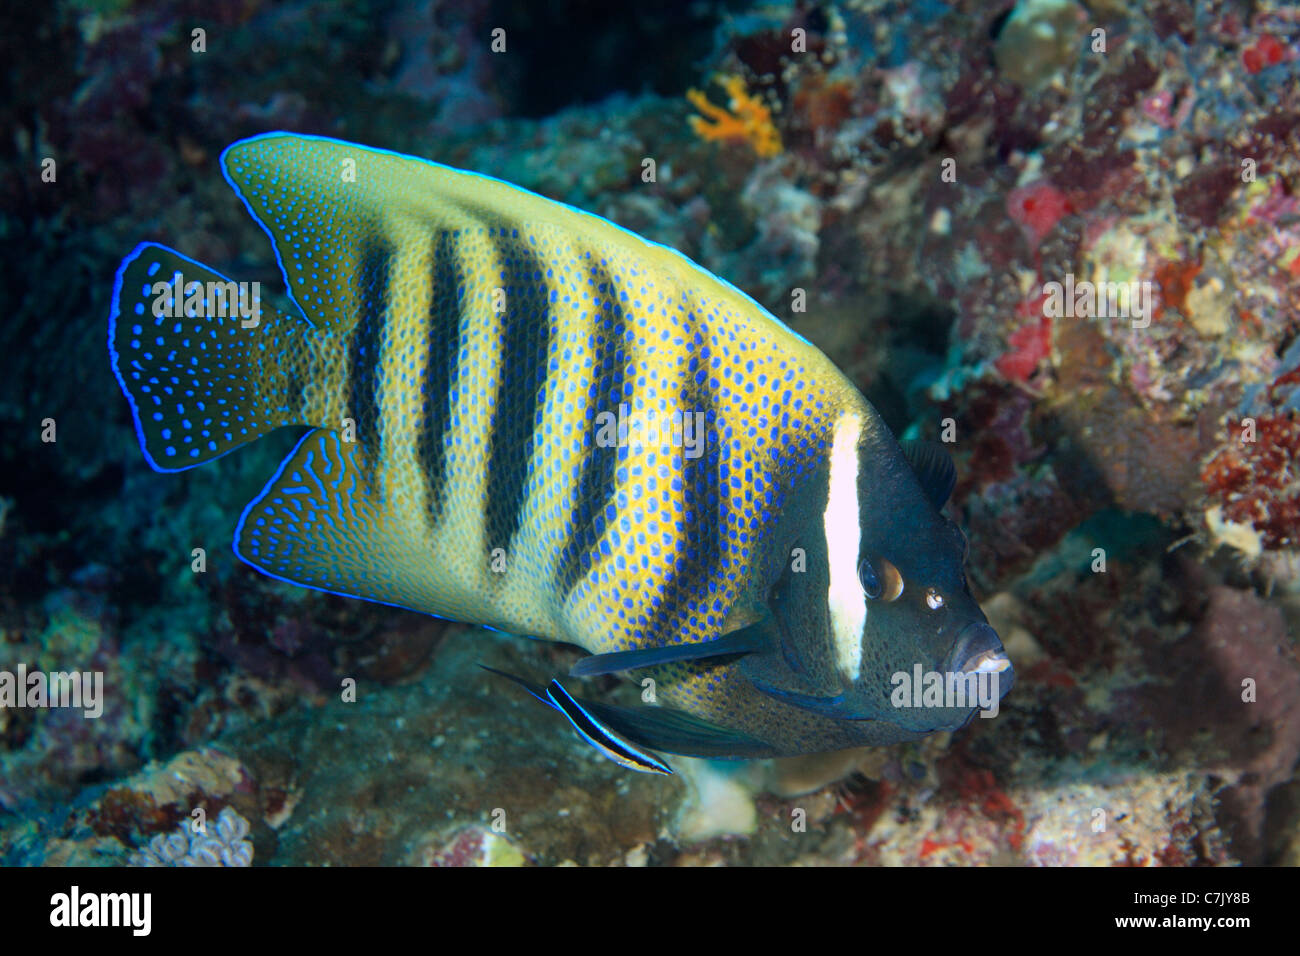 A Six Banded Angelfish, Pomacanthus sexstriatus, being cleaned by a Bluestreak Cleaner Fish, or Cleaner Wrasse Stock Photo